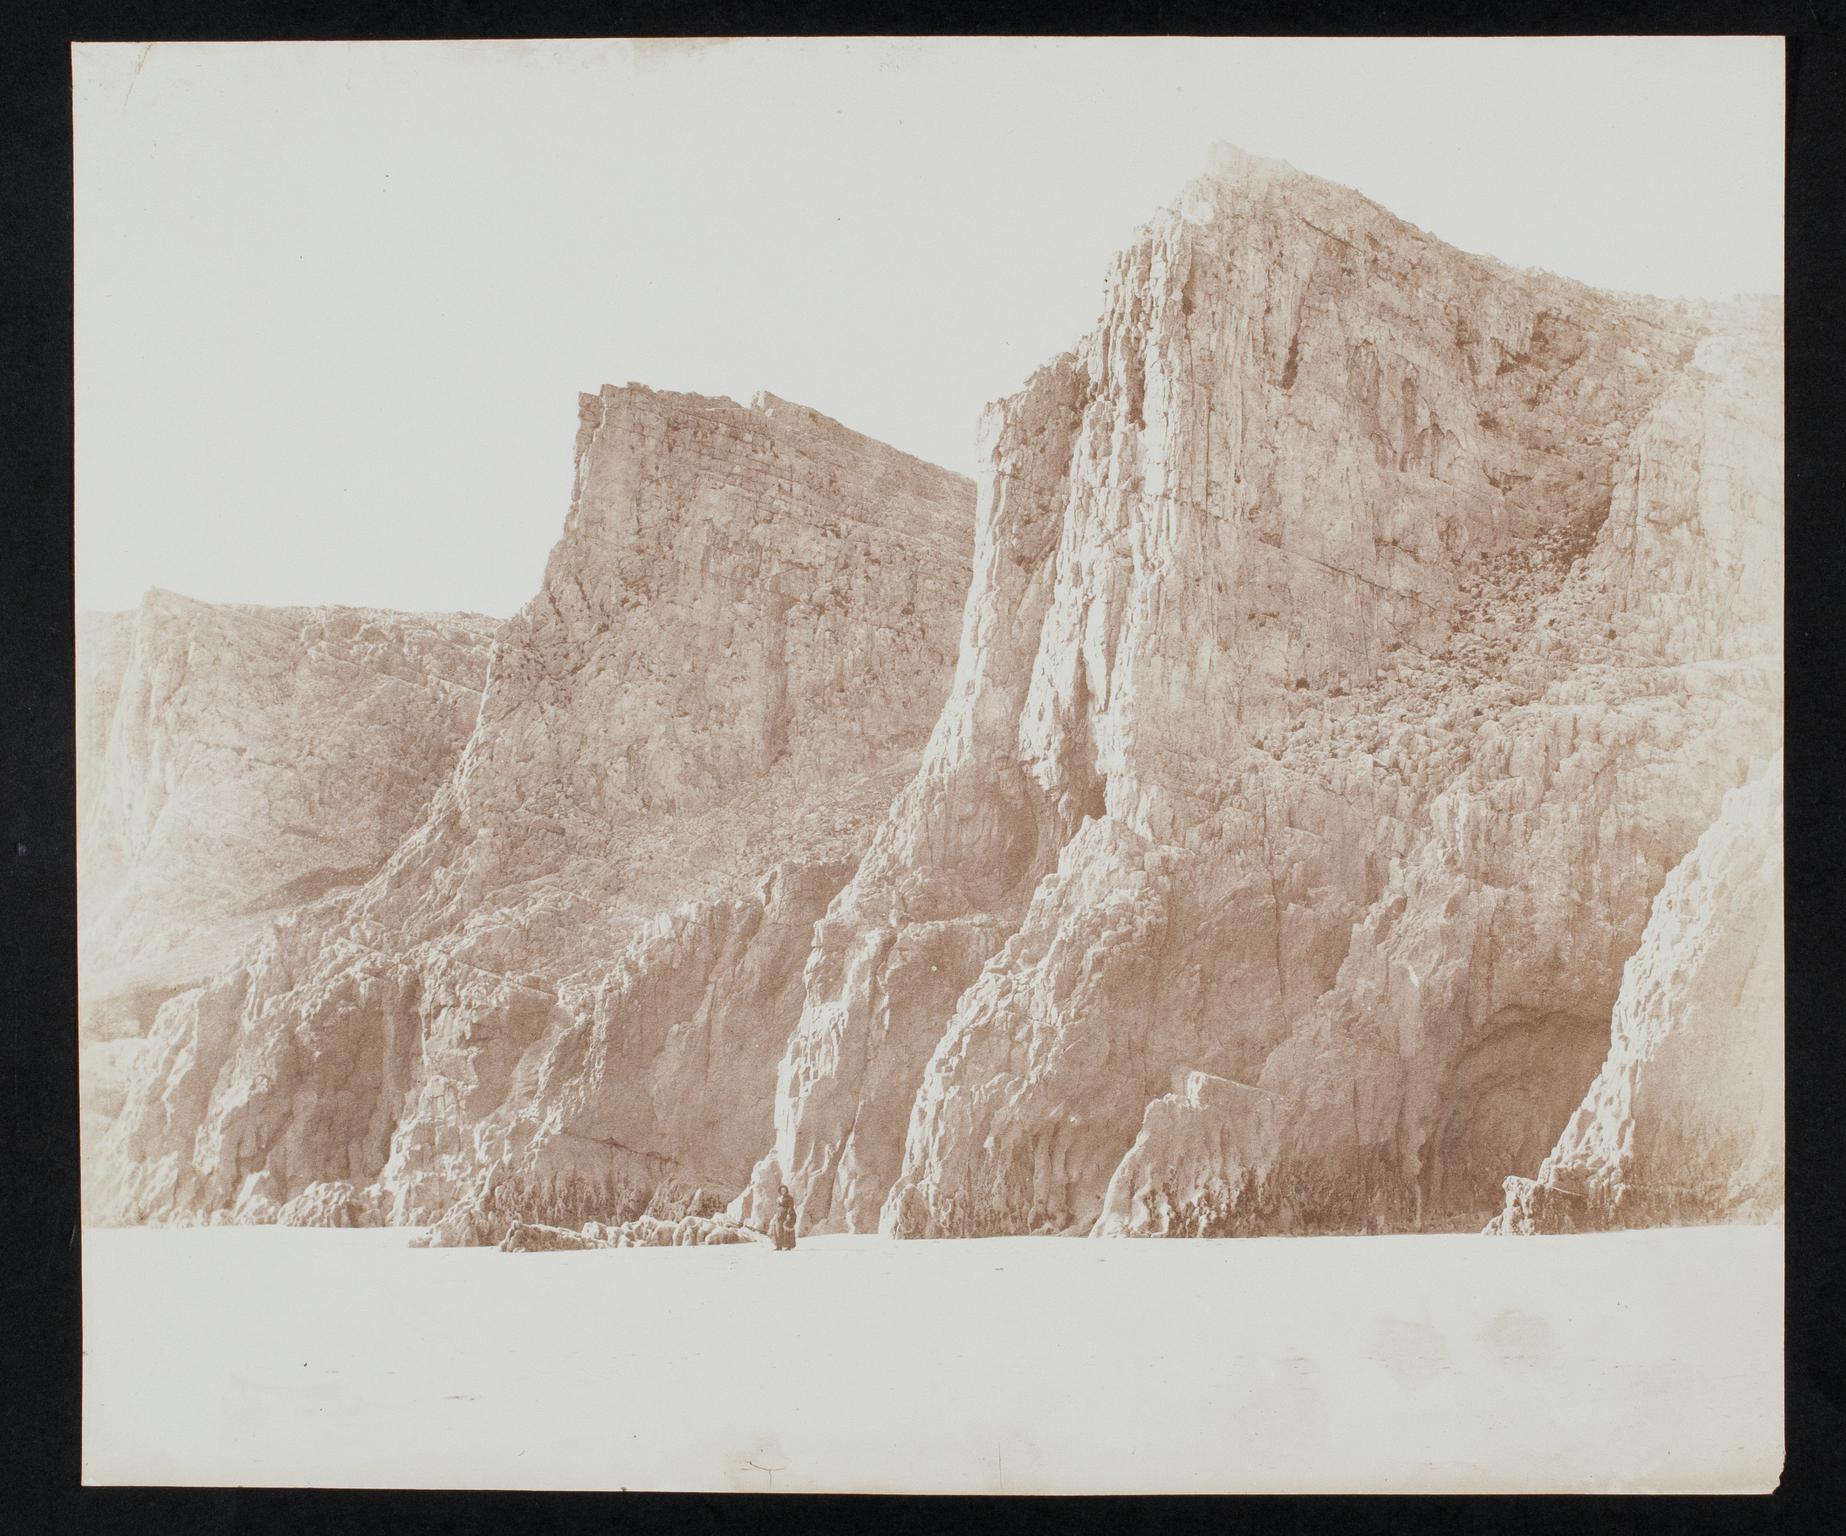 Beach with cliffs and female figure, photograph